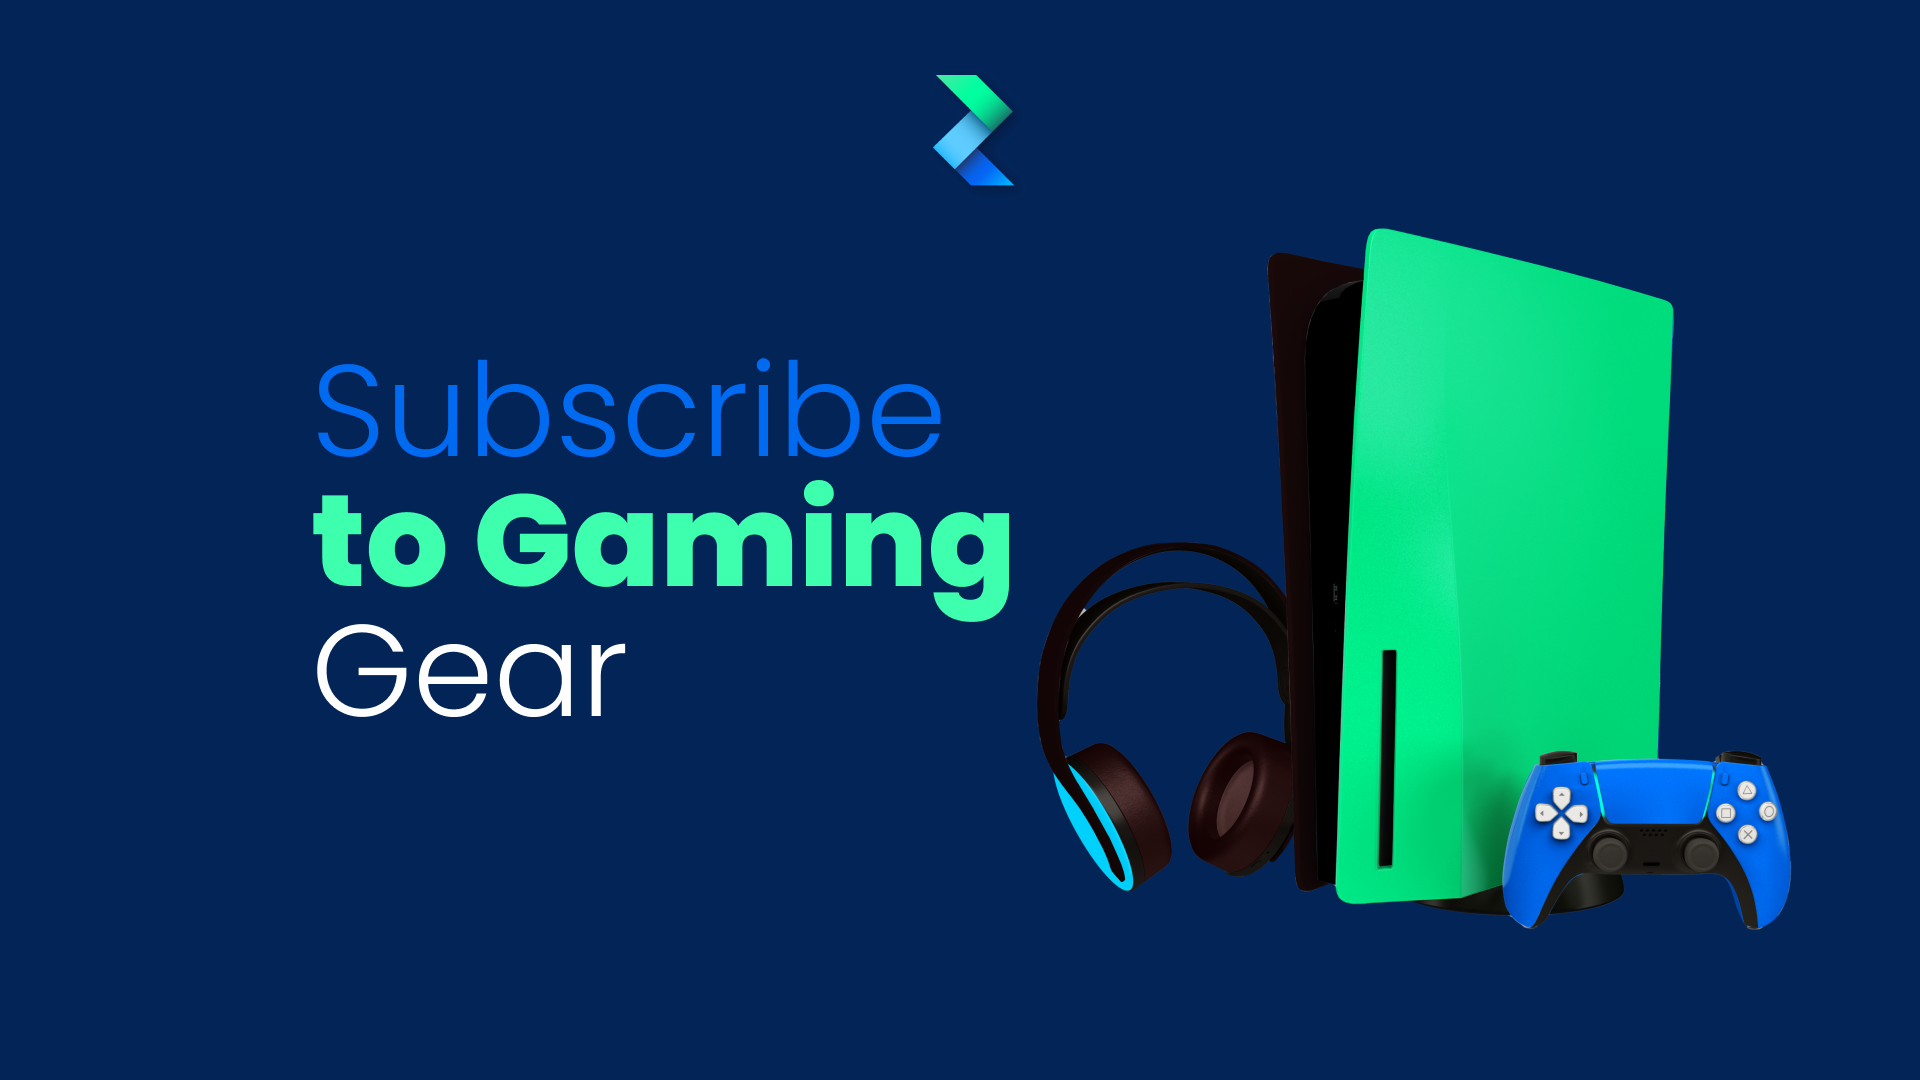 Subscribe to Gaming Gear